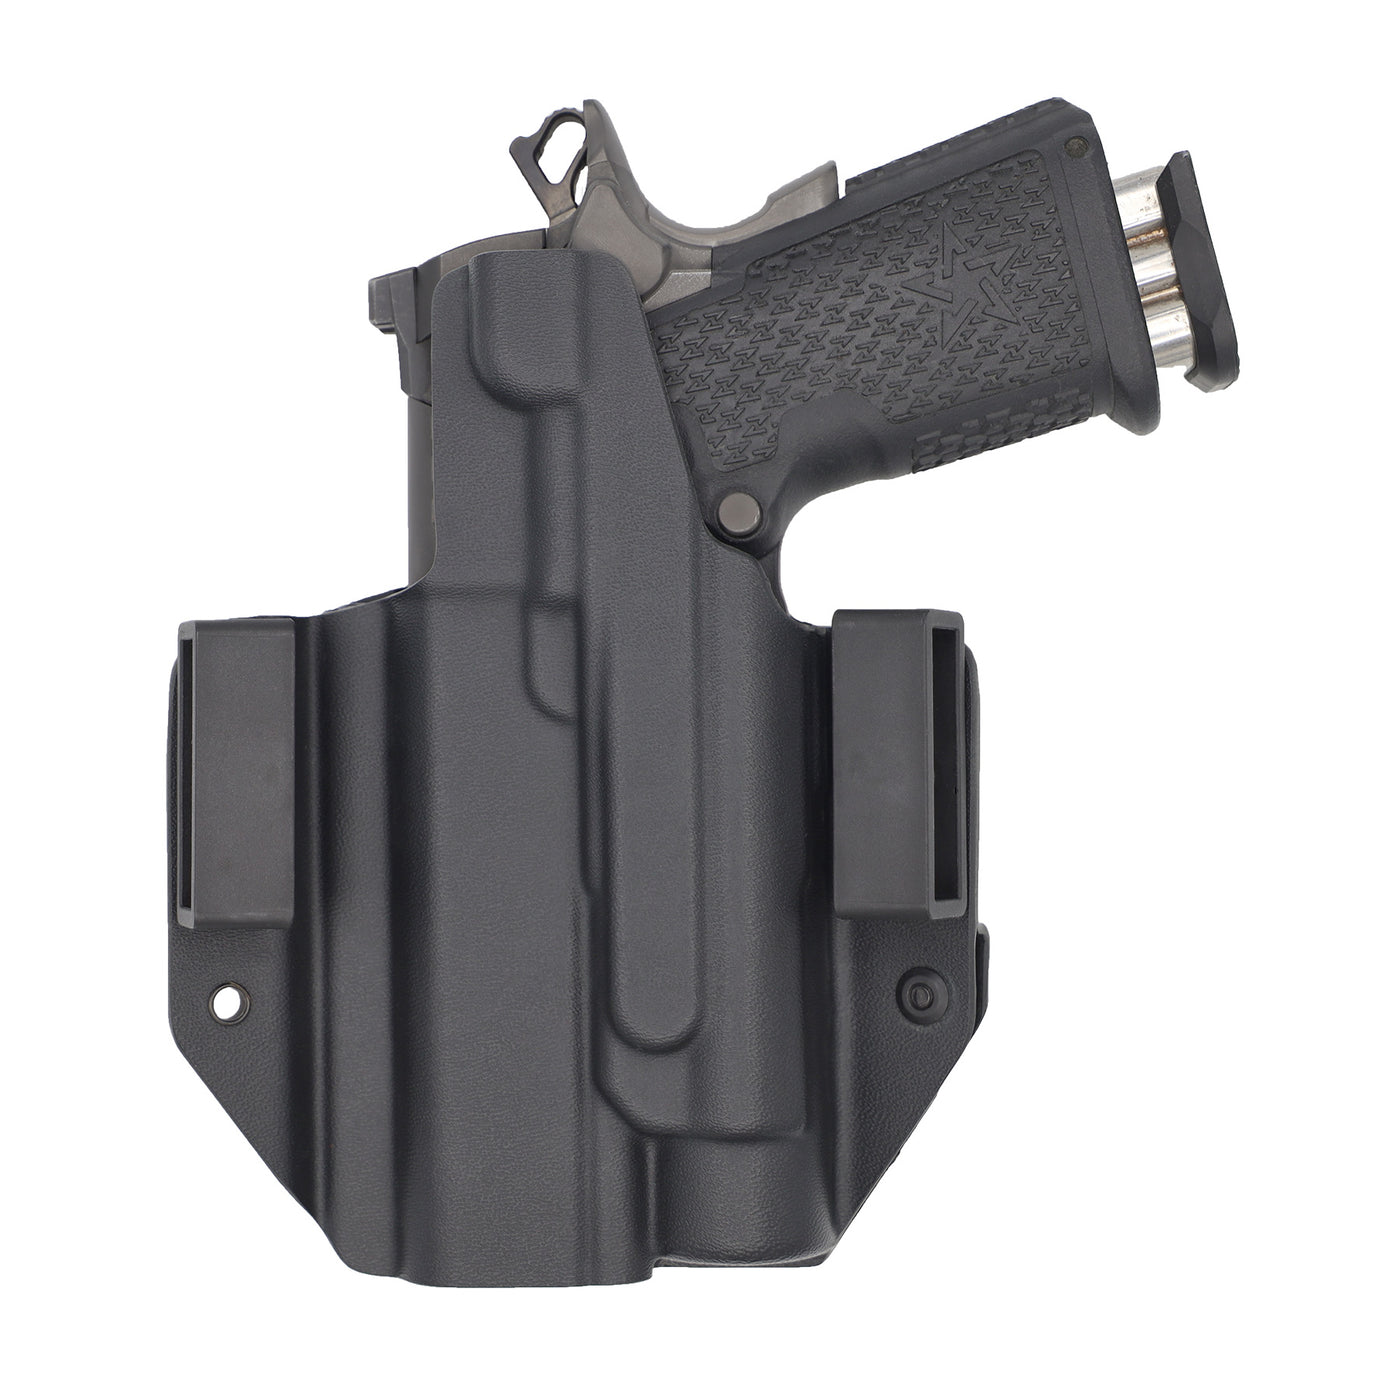 C&G Holsters Quickship OWB tactical 1911/2011 Streamlight TLR-1 in holstered position back view